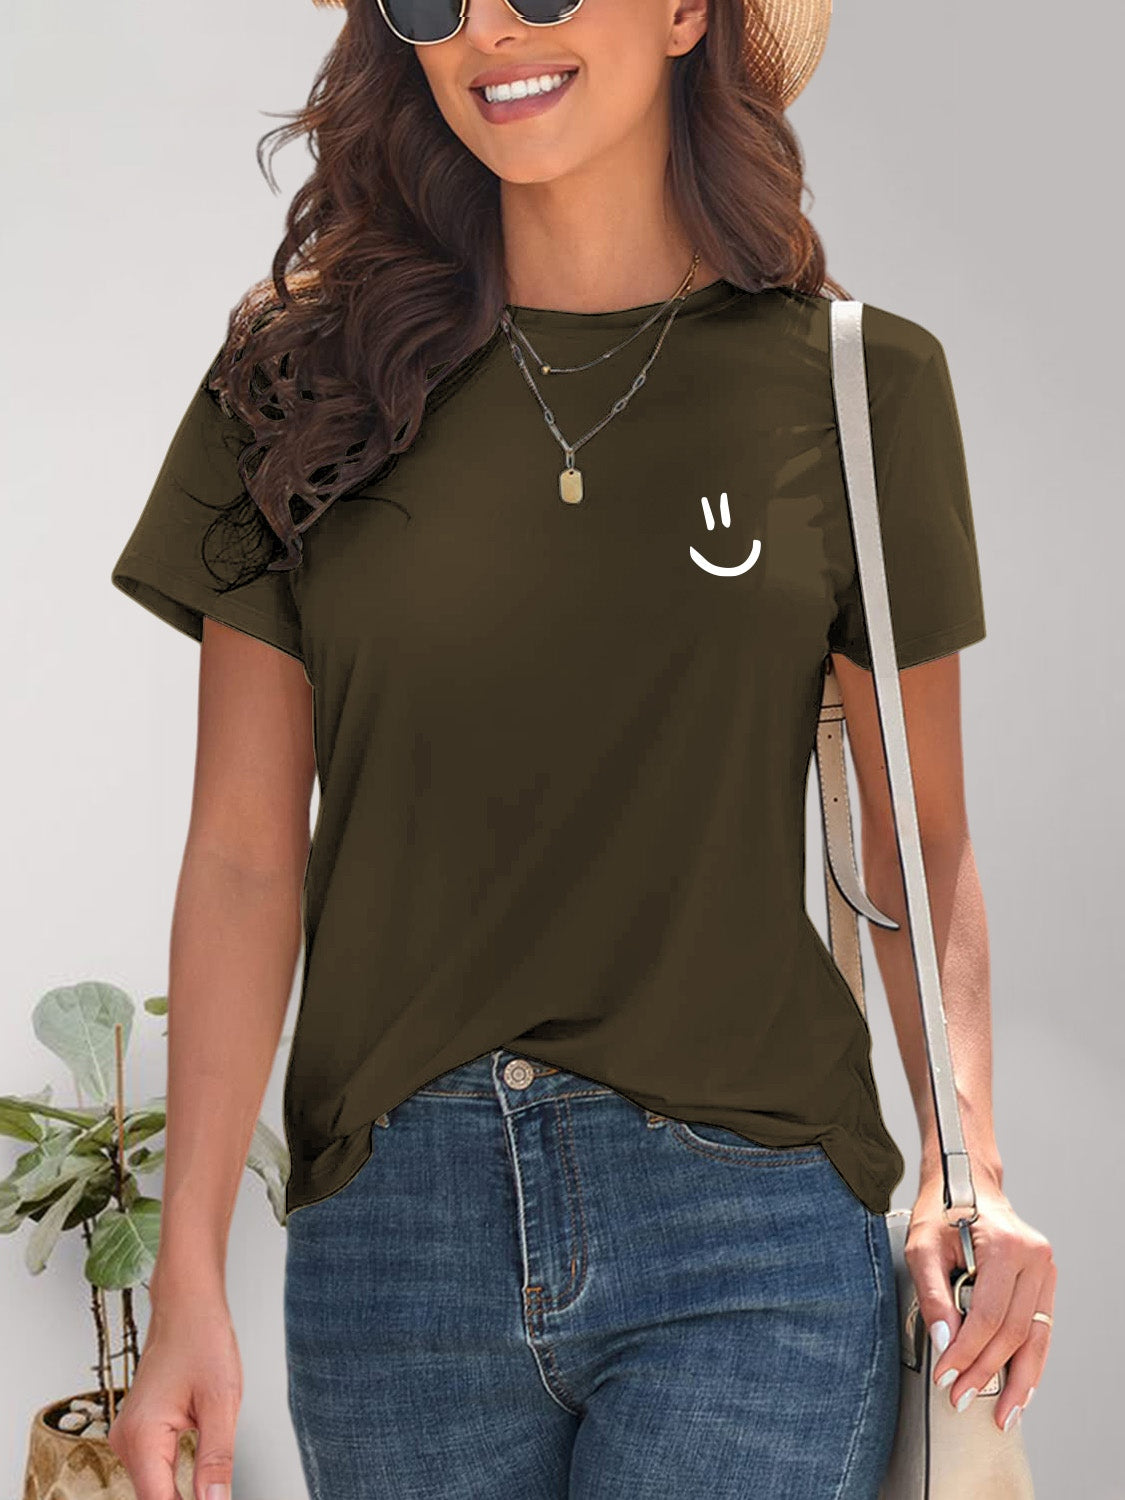 Smile Graphic Round Neck Short Sleeve T-Shirt Army Green S 